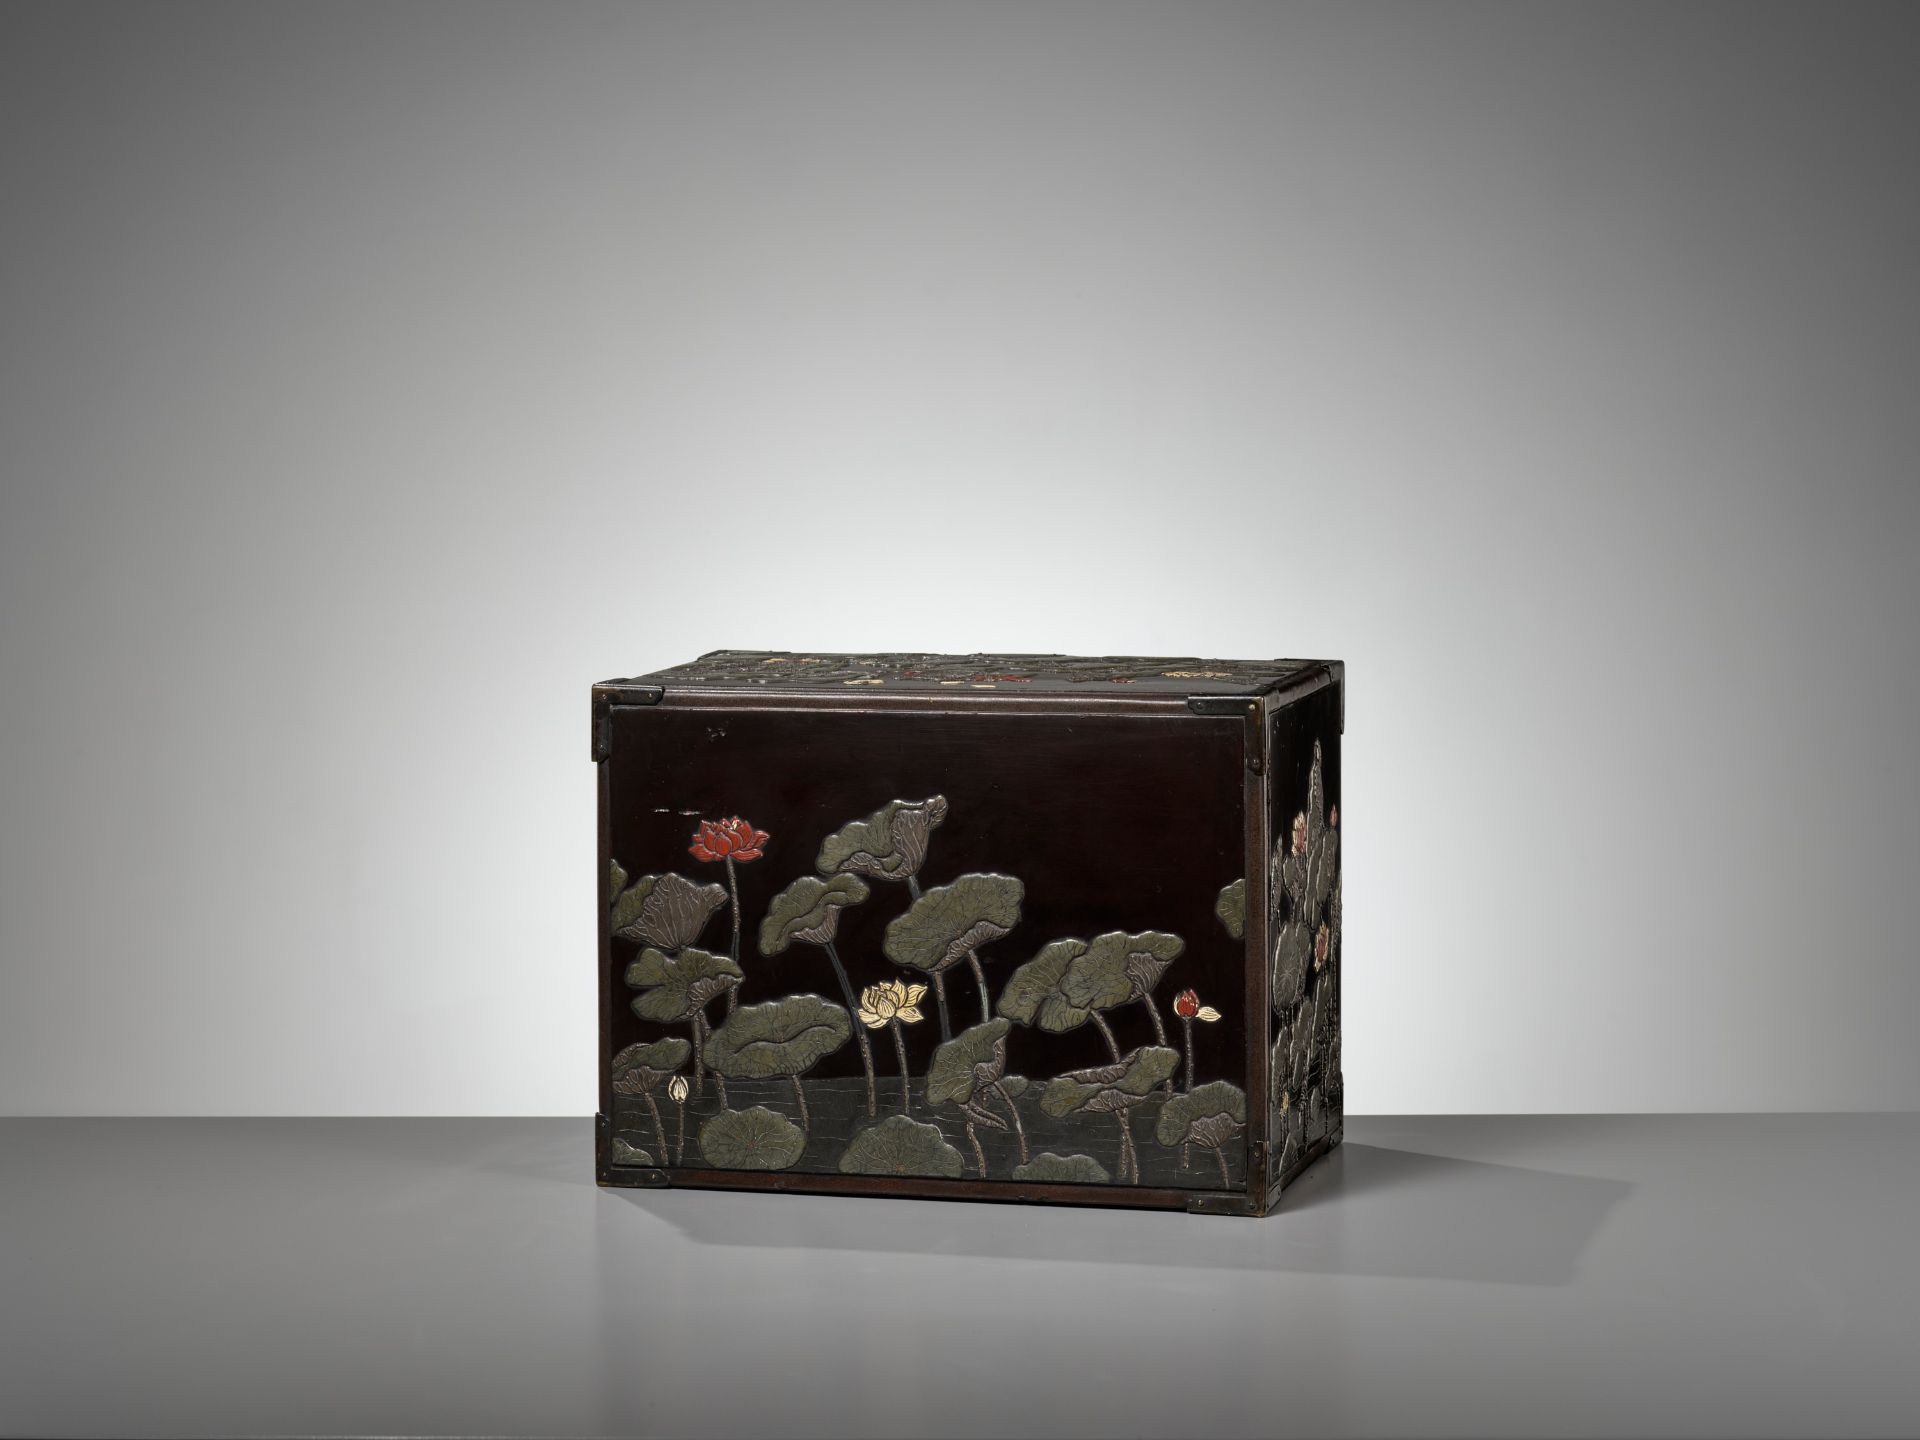 A RITSUO STYLE CERAMIC-INLAID AND LACQUERED WOOD KODANSU (CABINET) WITH A LOTUS POND AND EGRETS - Image 9 of 14